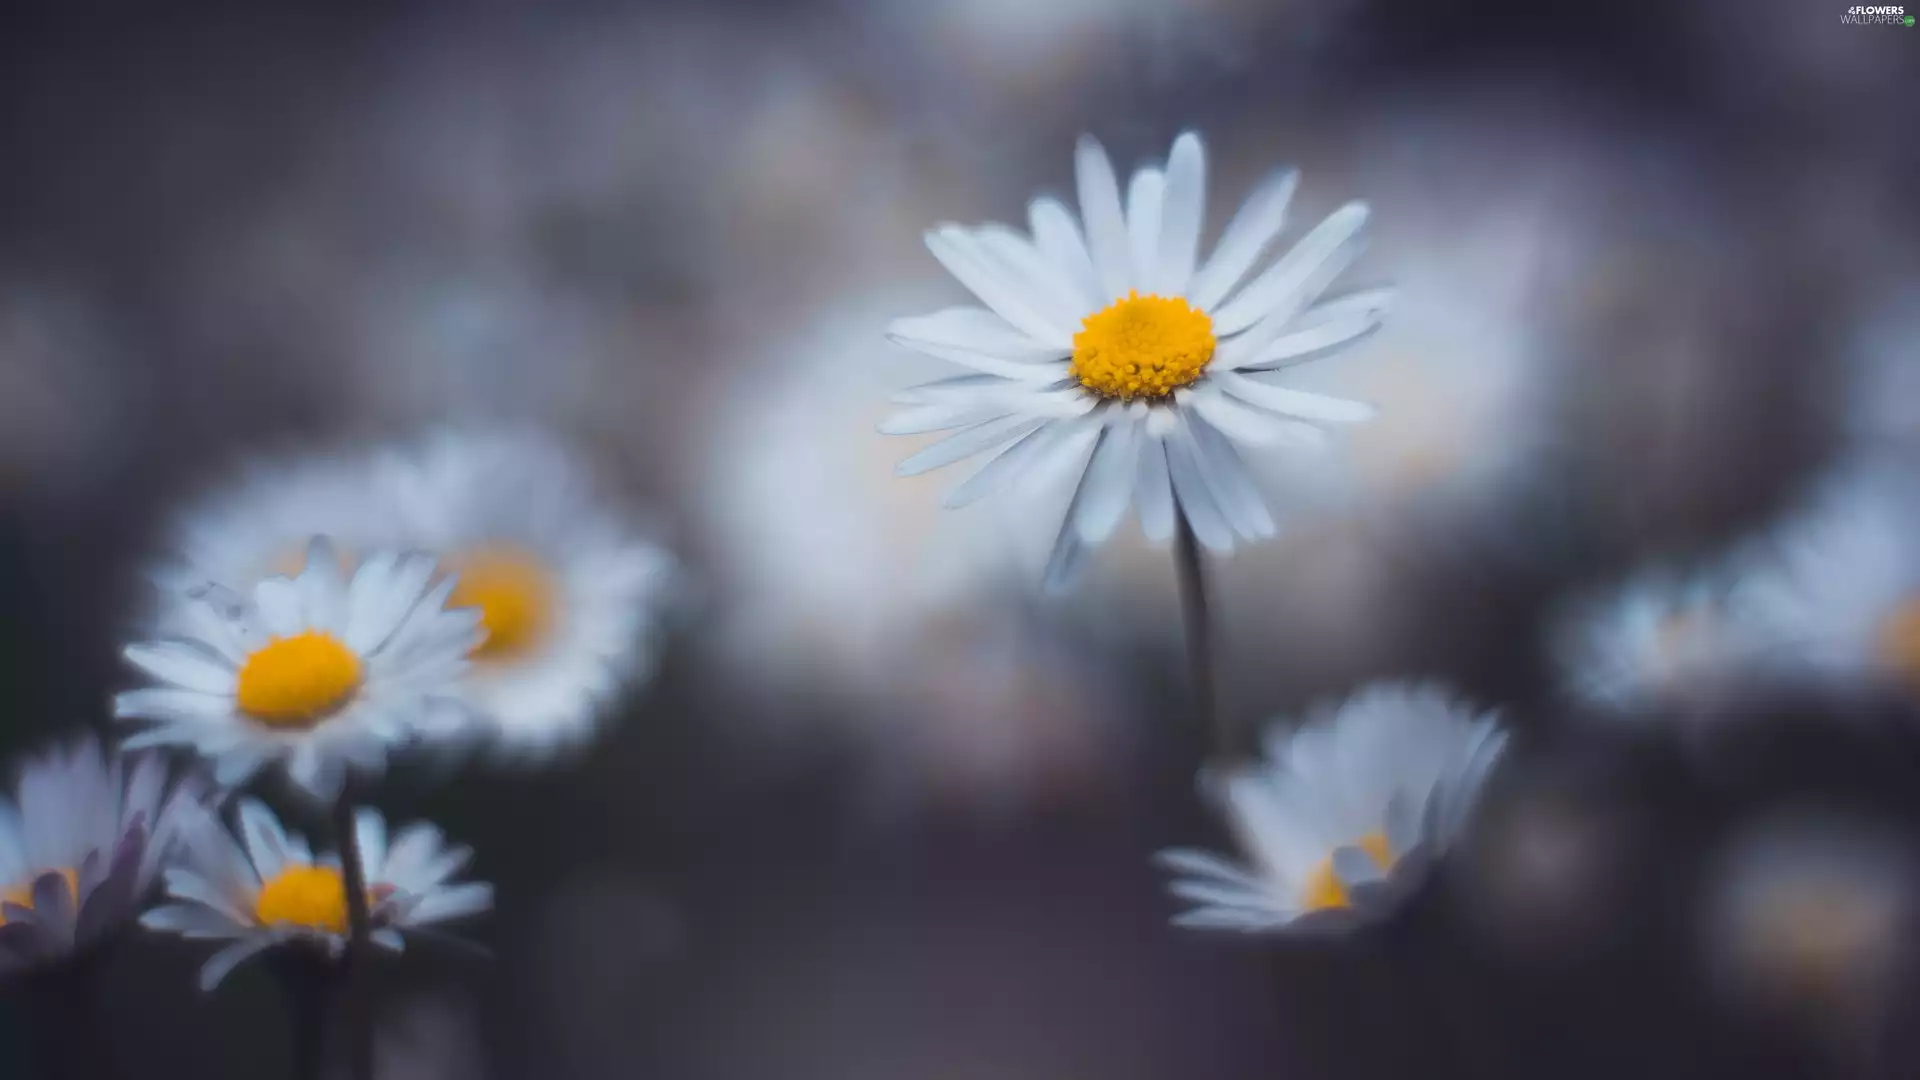 Flowers, daisies, blurry background, White